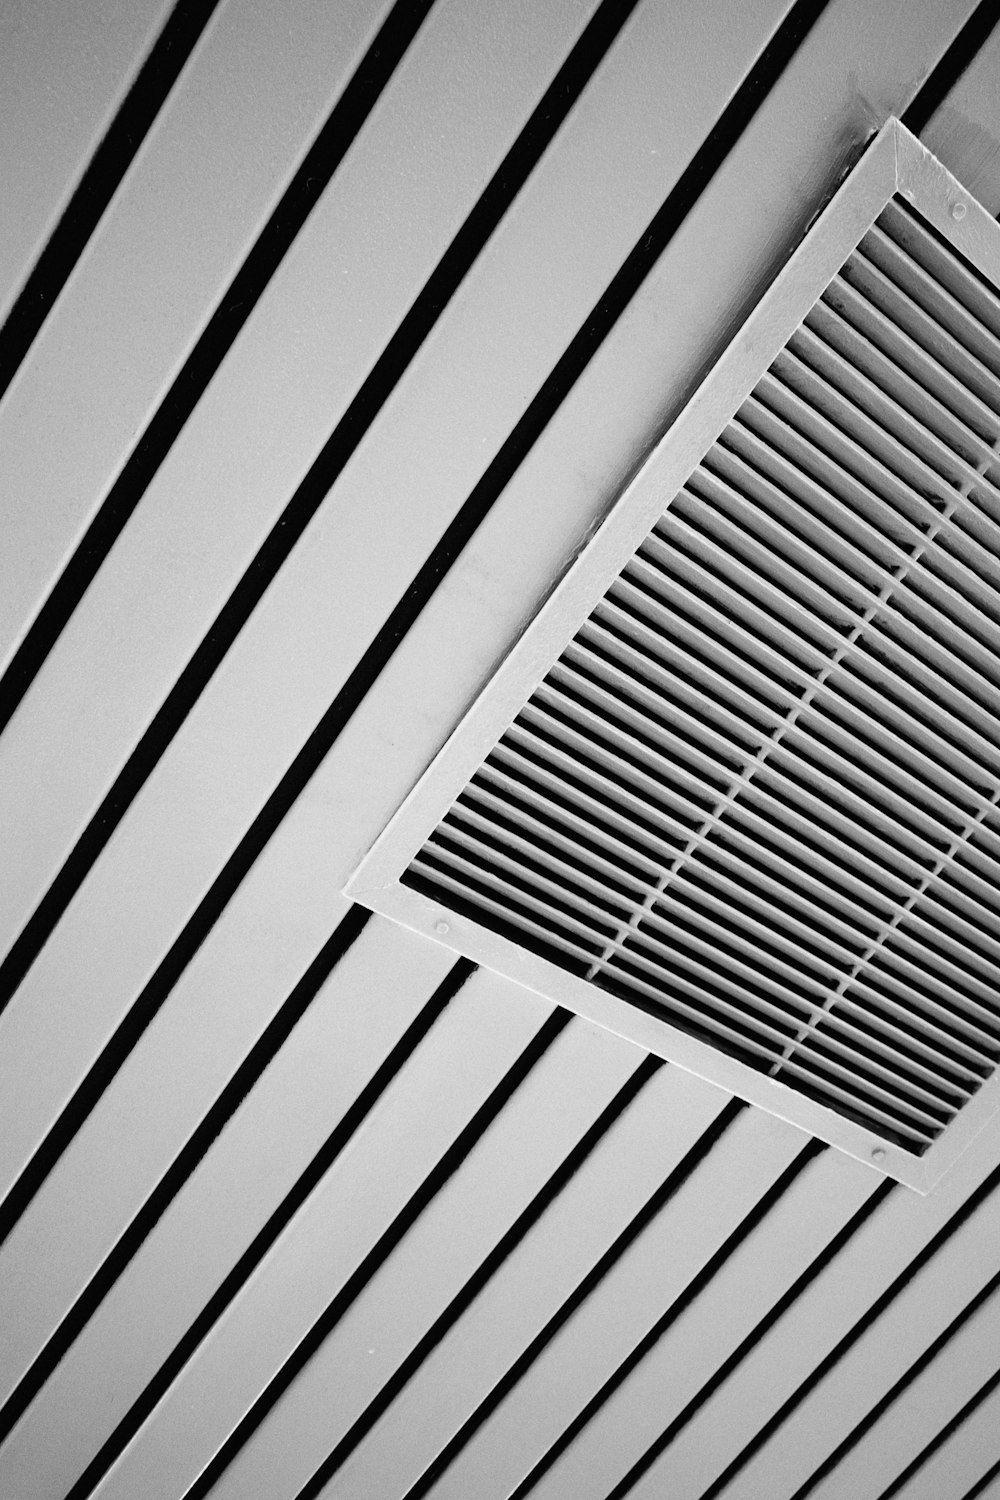 a black and white photo of a ceiling vent